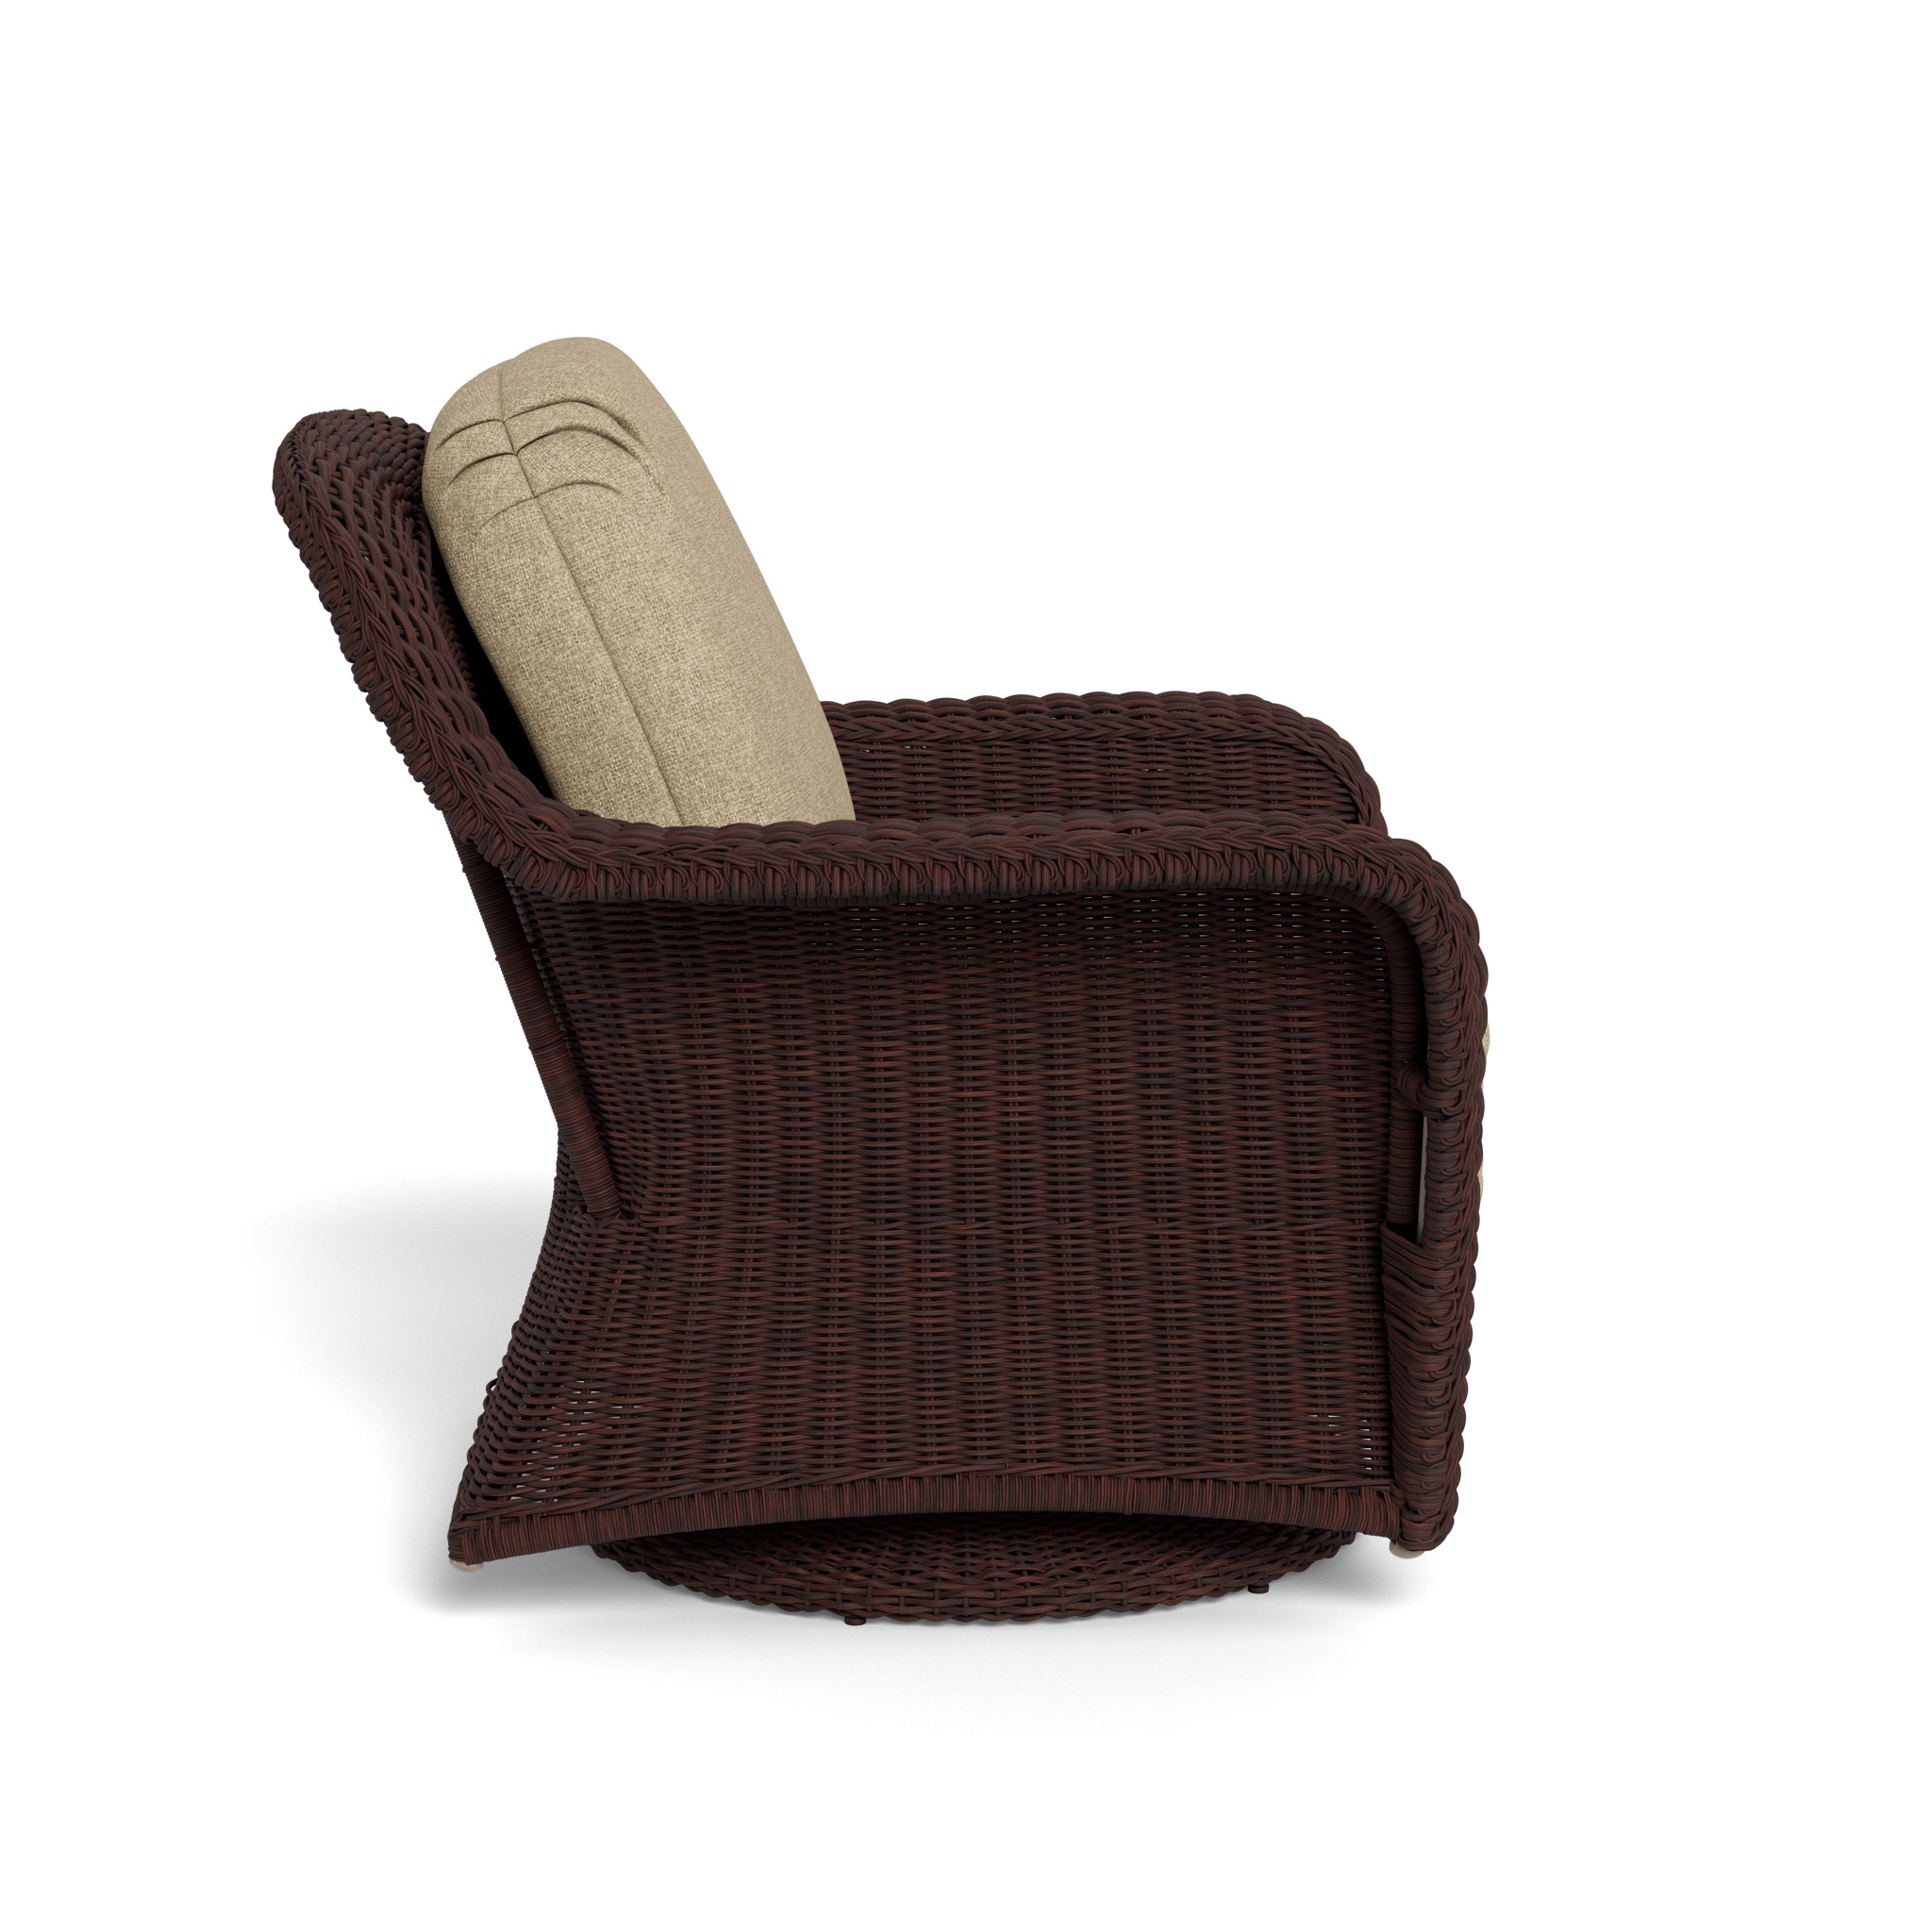 Sea Pines Swivel Glider Club Chair, Java, Canvas Natural - image 3 of 5